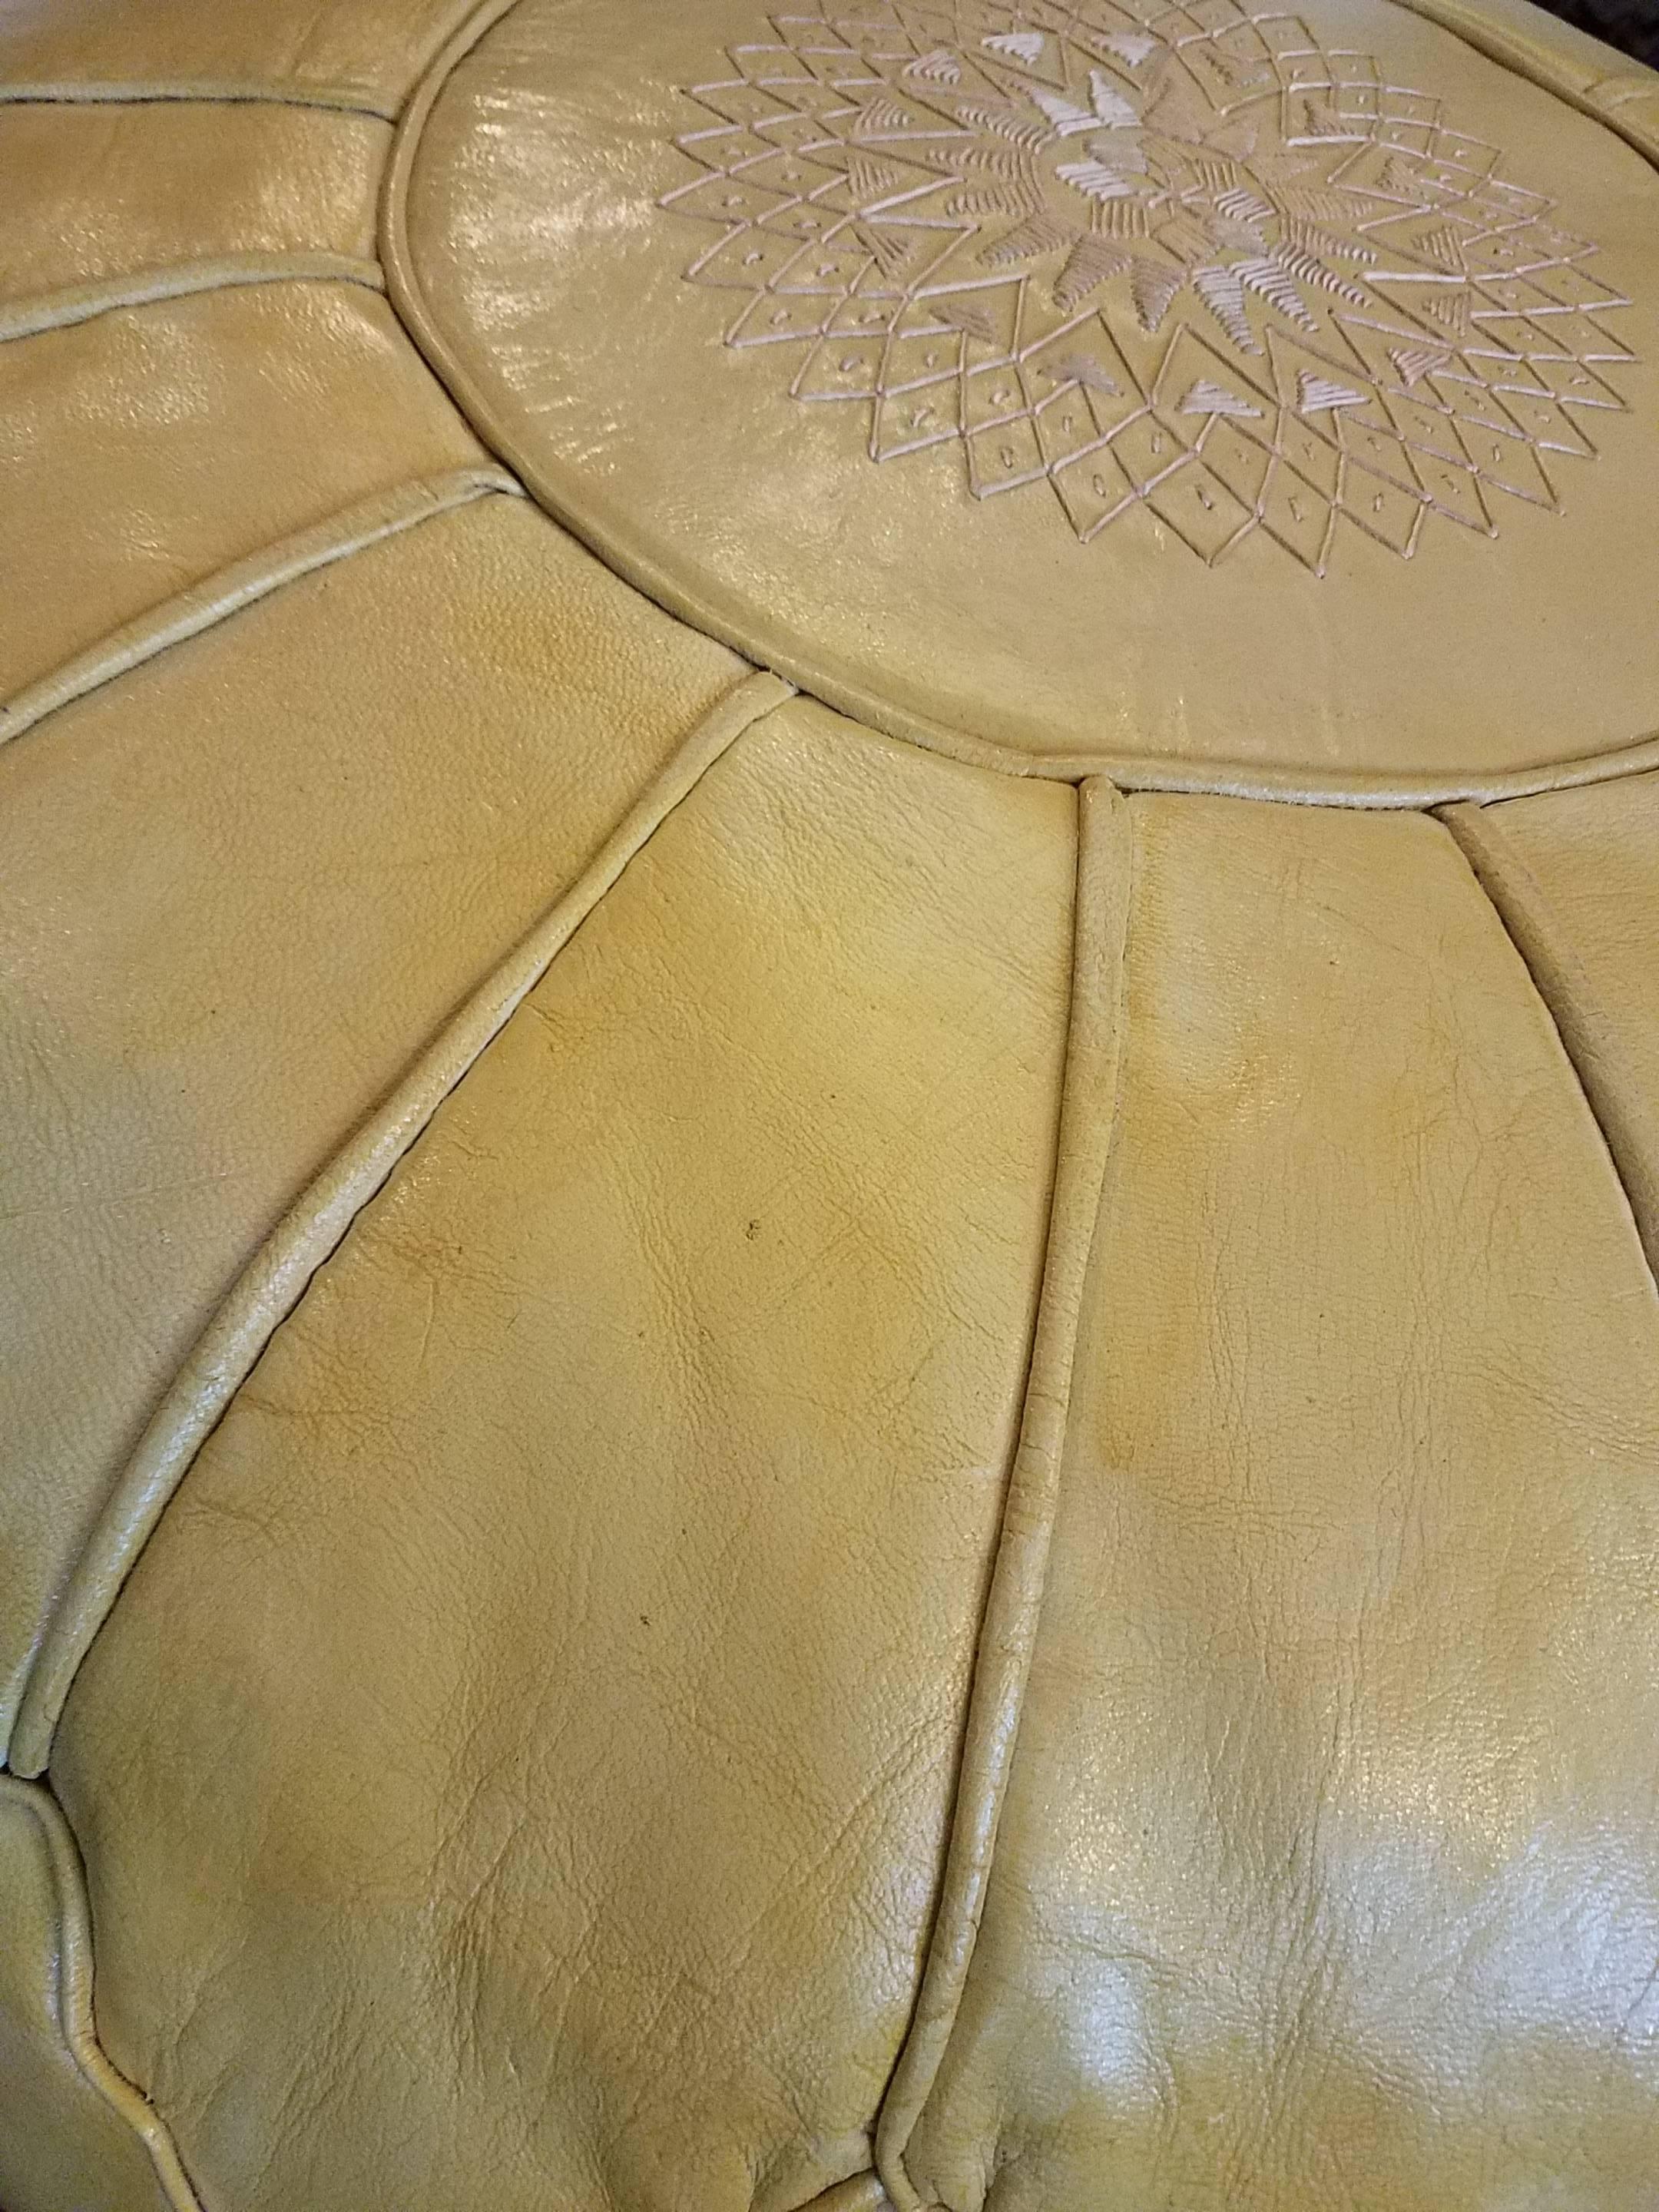 Contemporary Oversize Moroccan Leather Pouf in Saffron Yellow For Sale